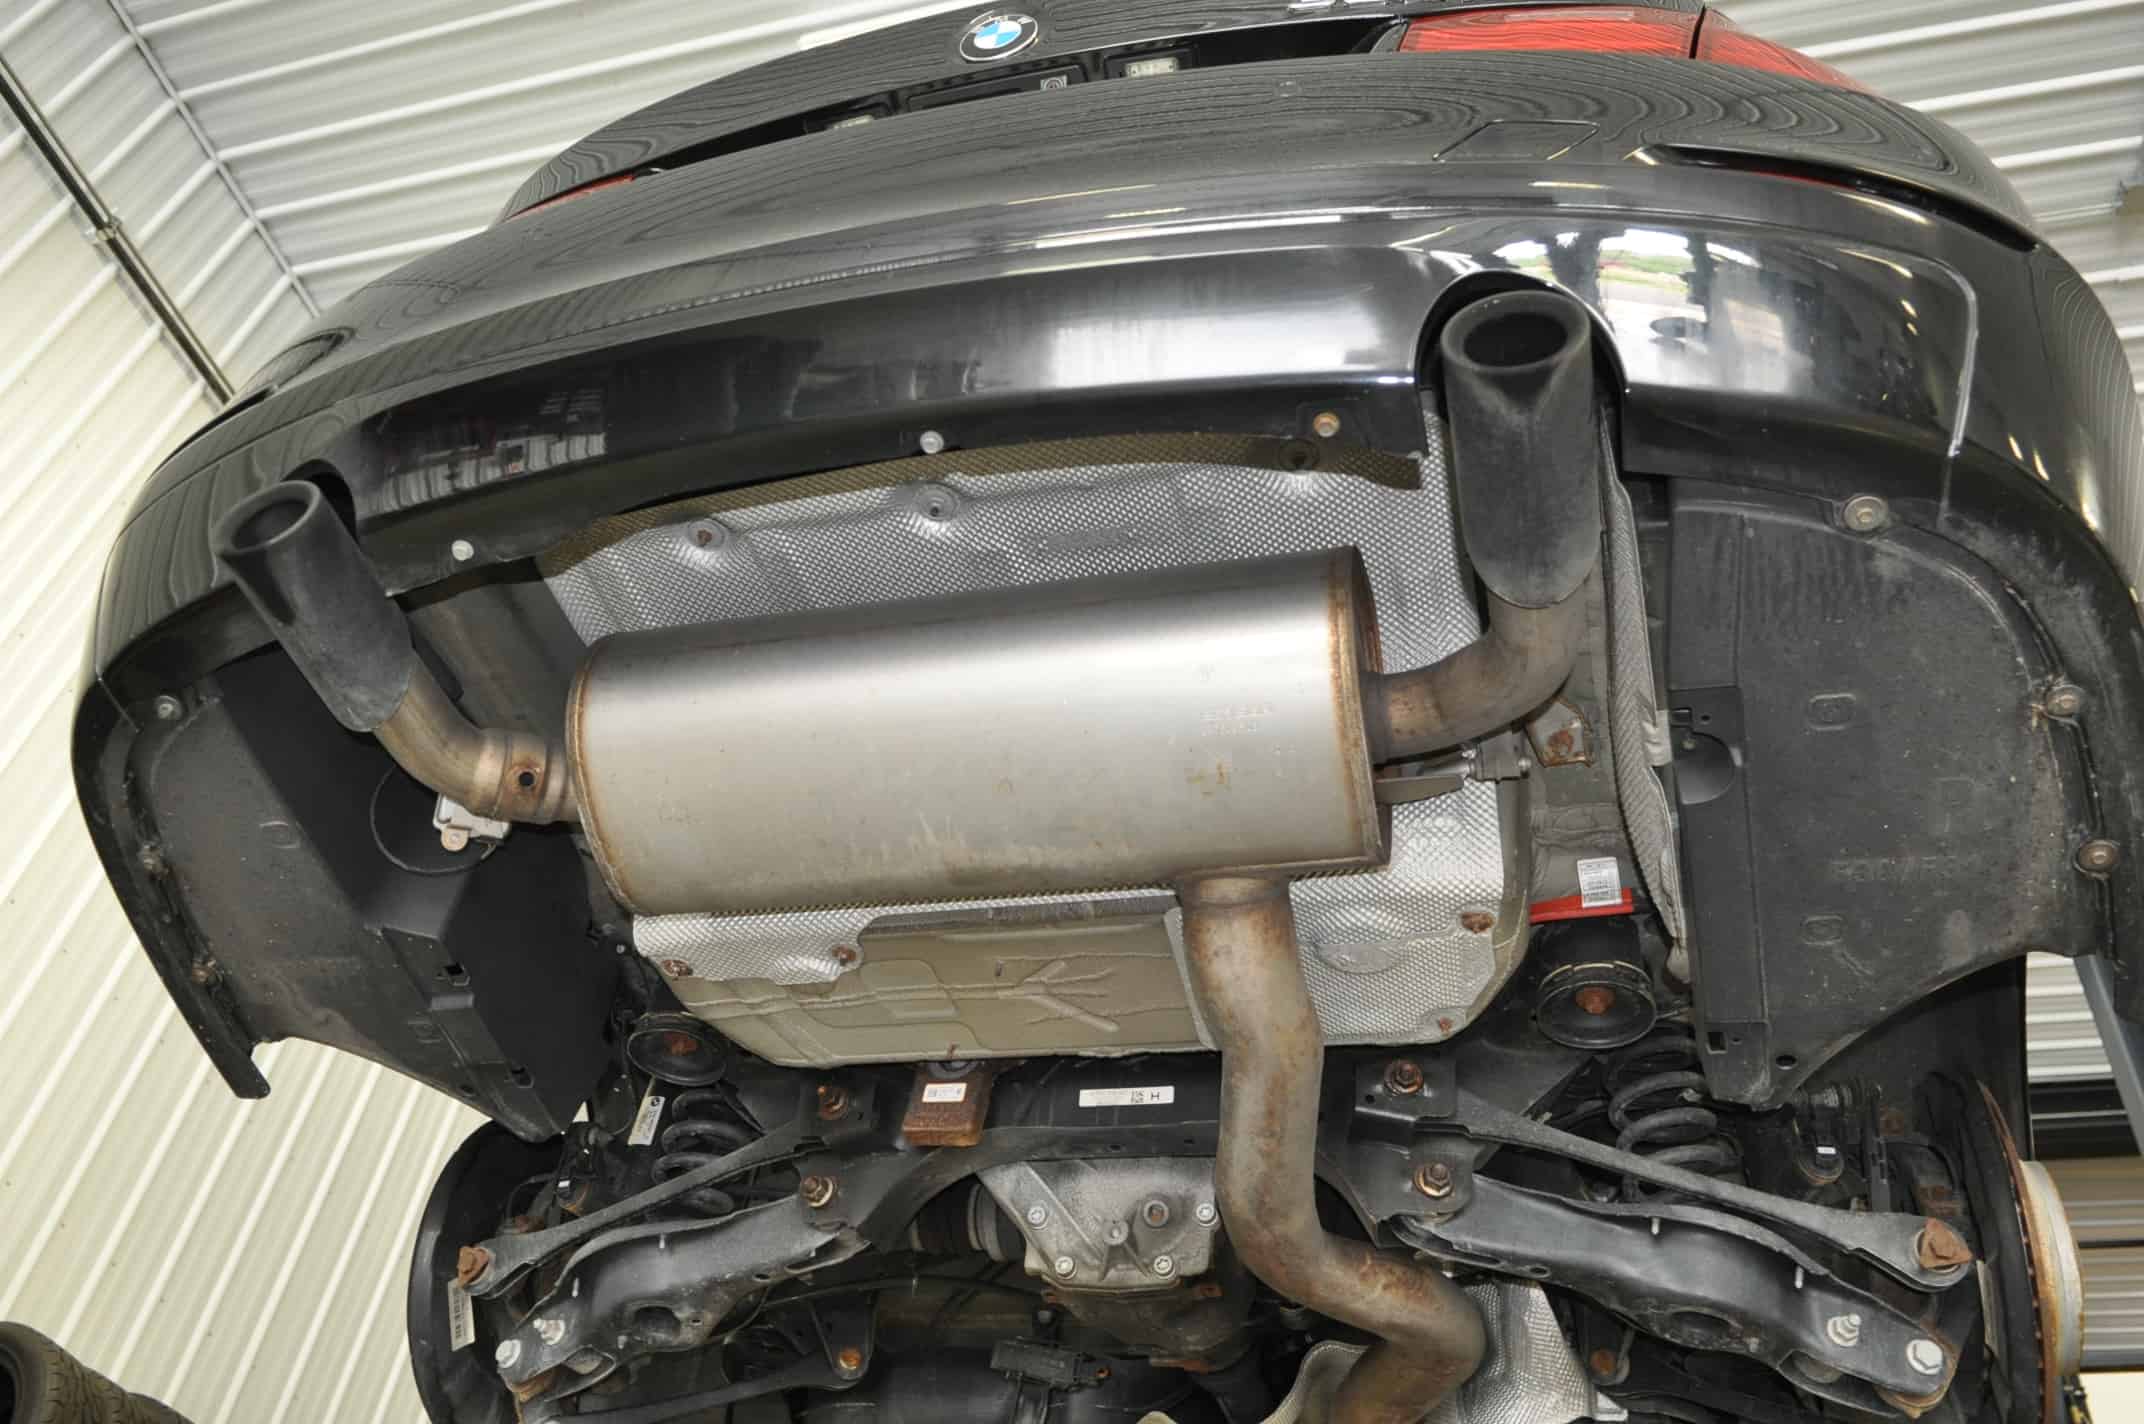 F30 BMW 335i Agency Power Exhaust Install by FMU in Naperville